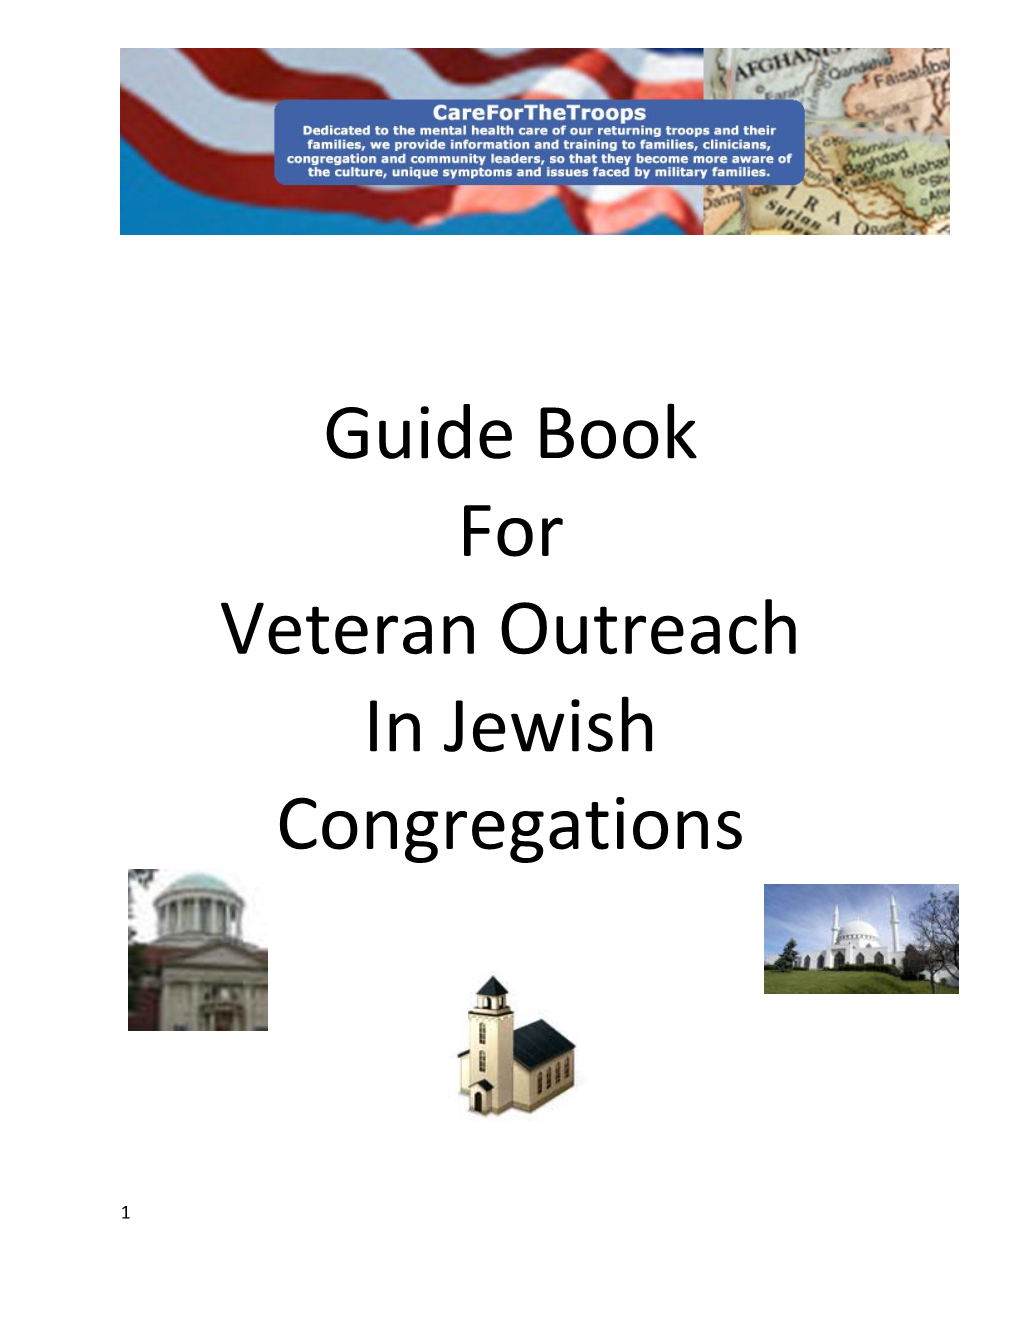 Guide Book for Veteran Outreach in Jewish Congregations